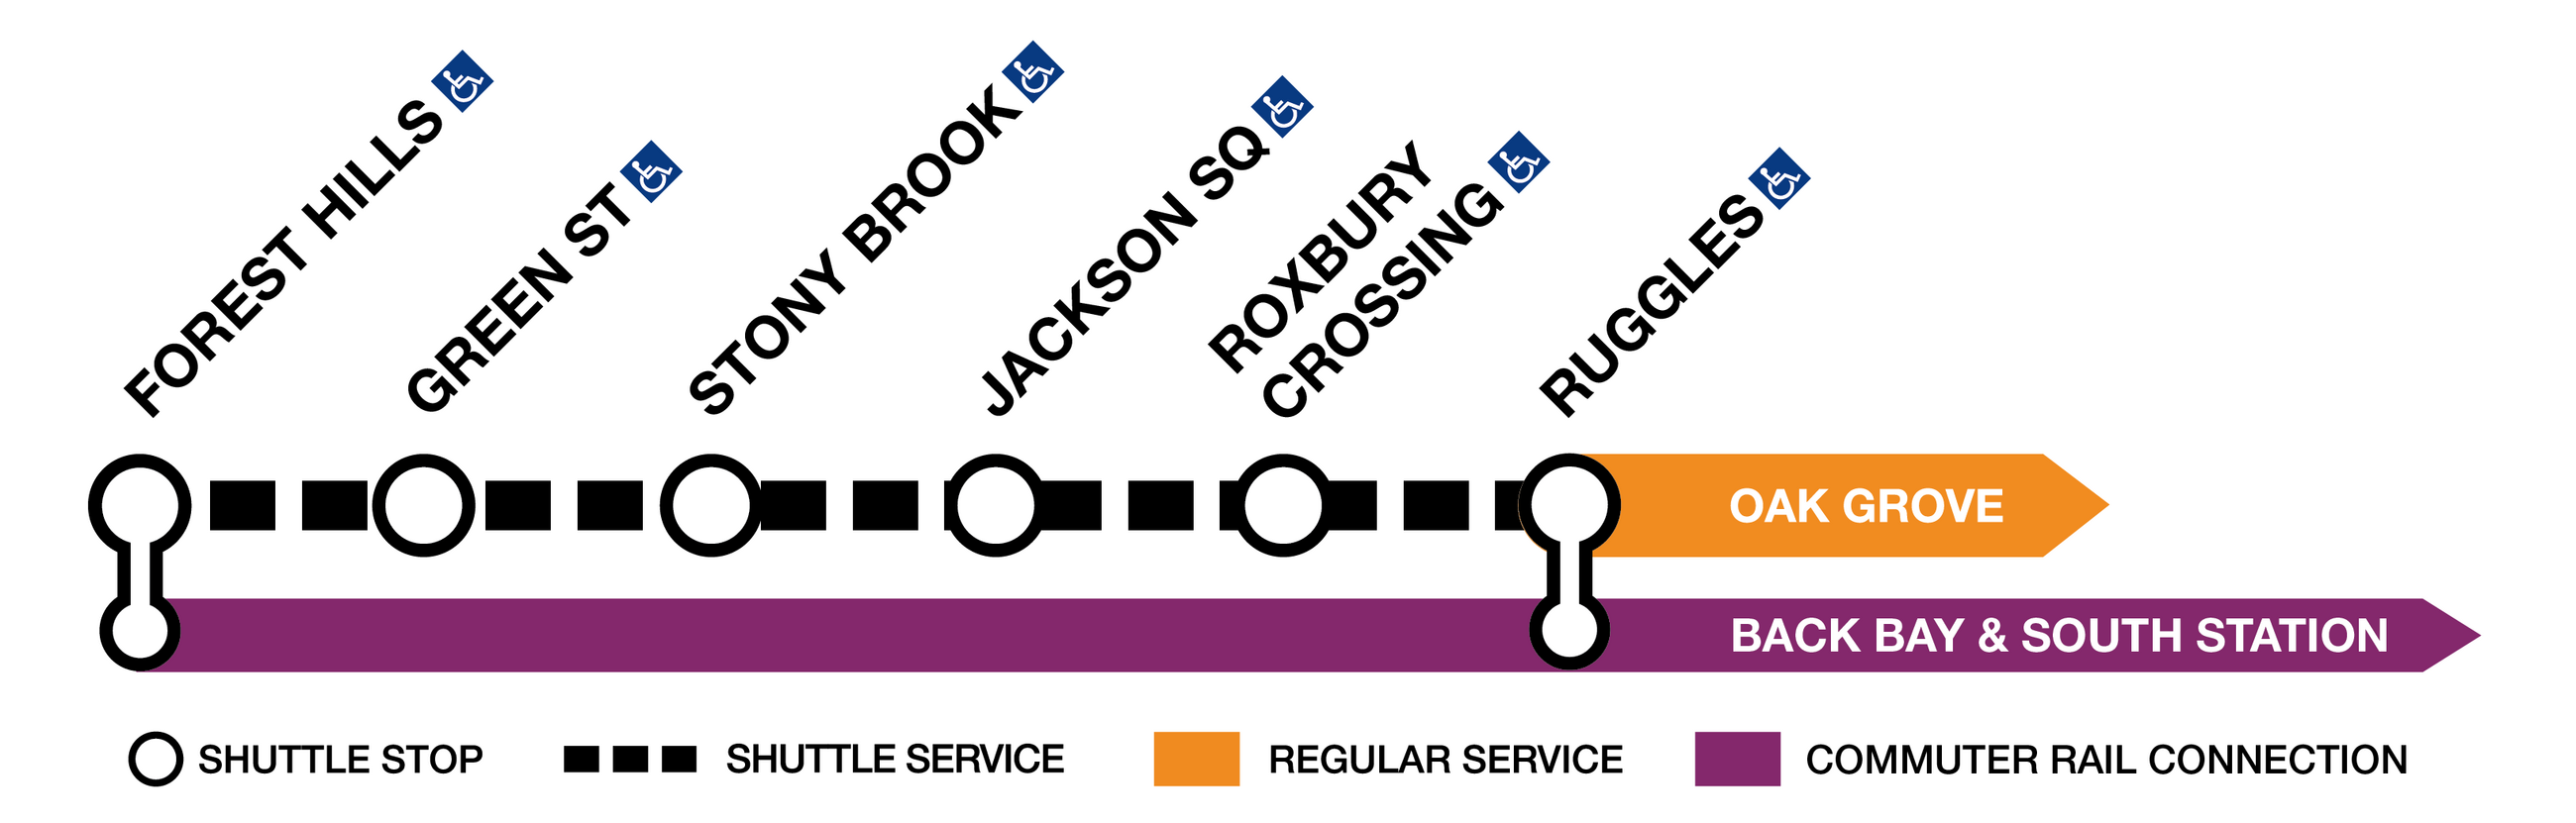 Shuttle service graphic for the Orange Line Forest Hills to Ruggles diversion